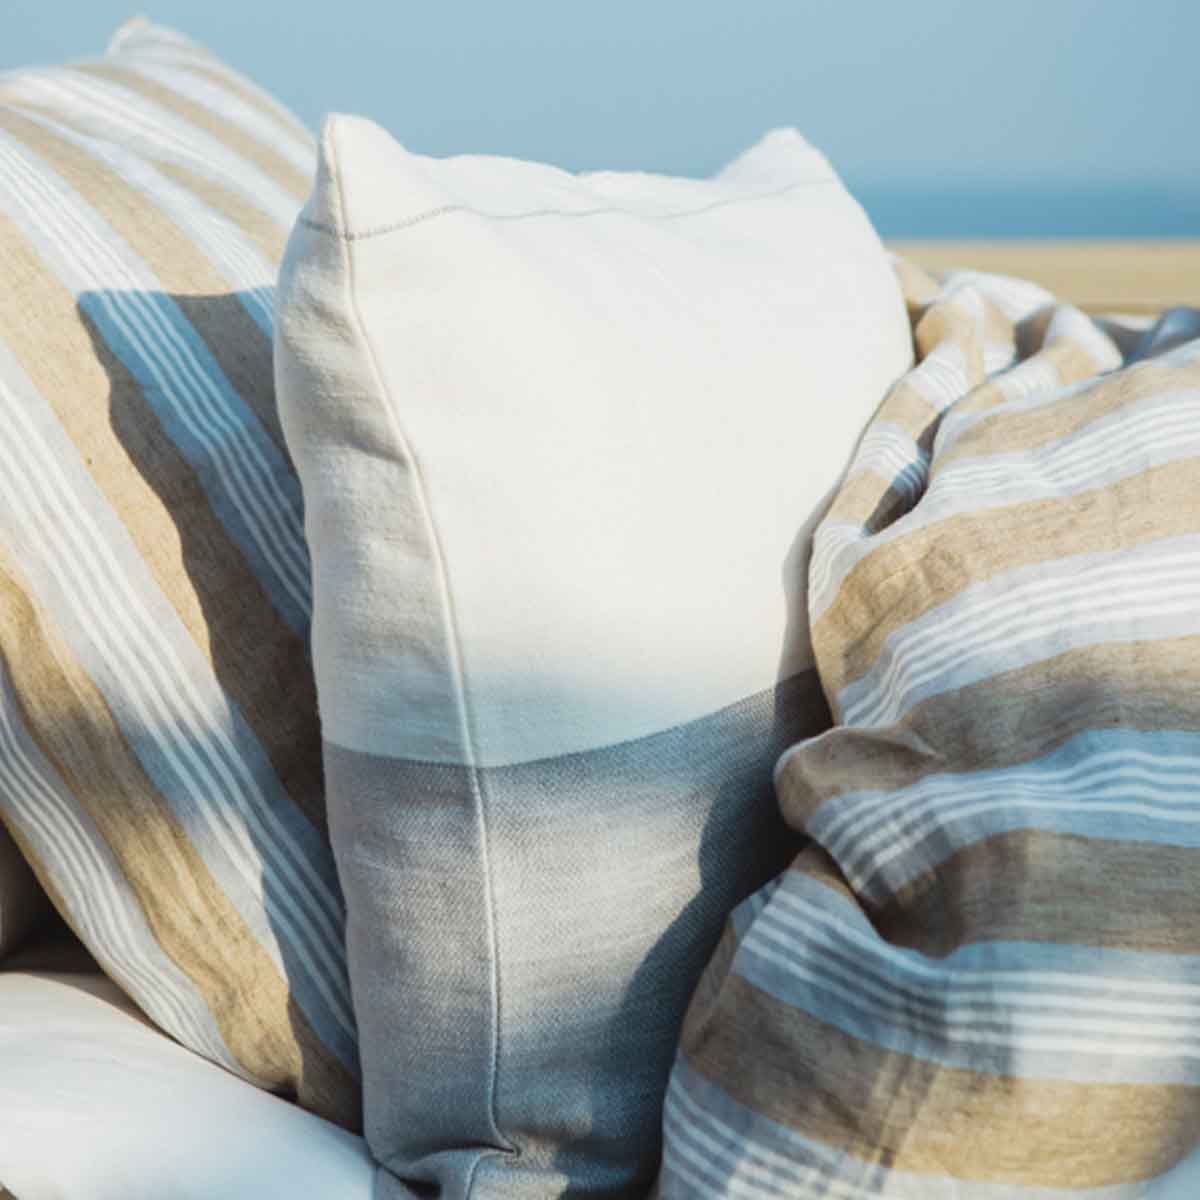 Maora washed linen duvet cover - Libeco